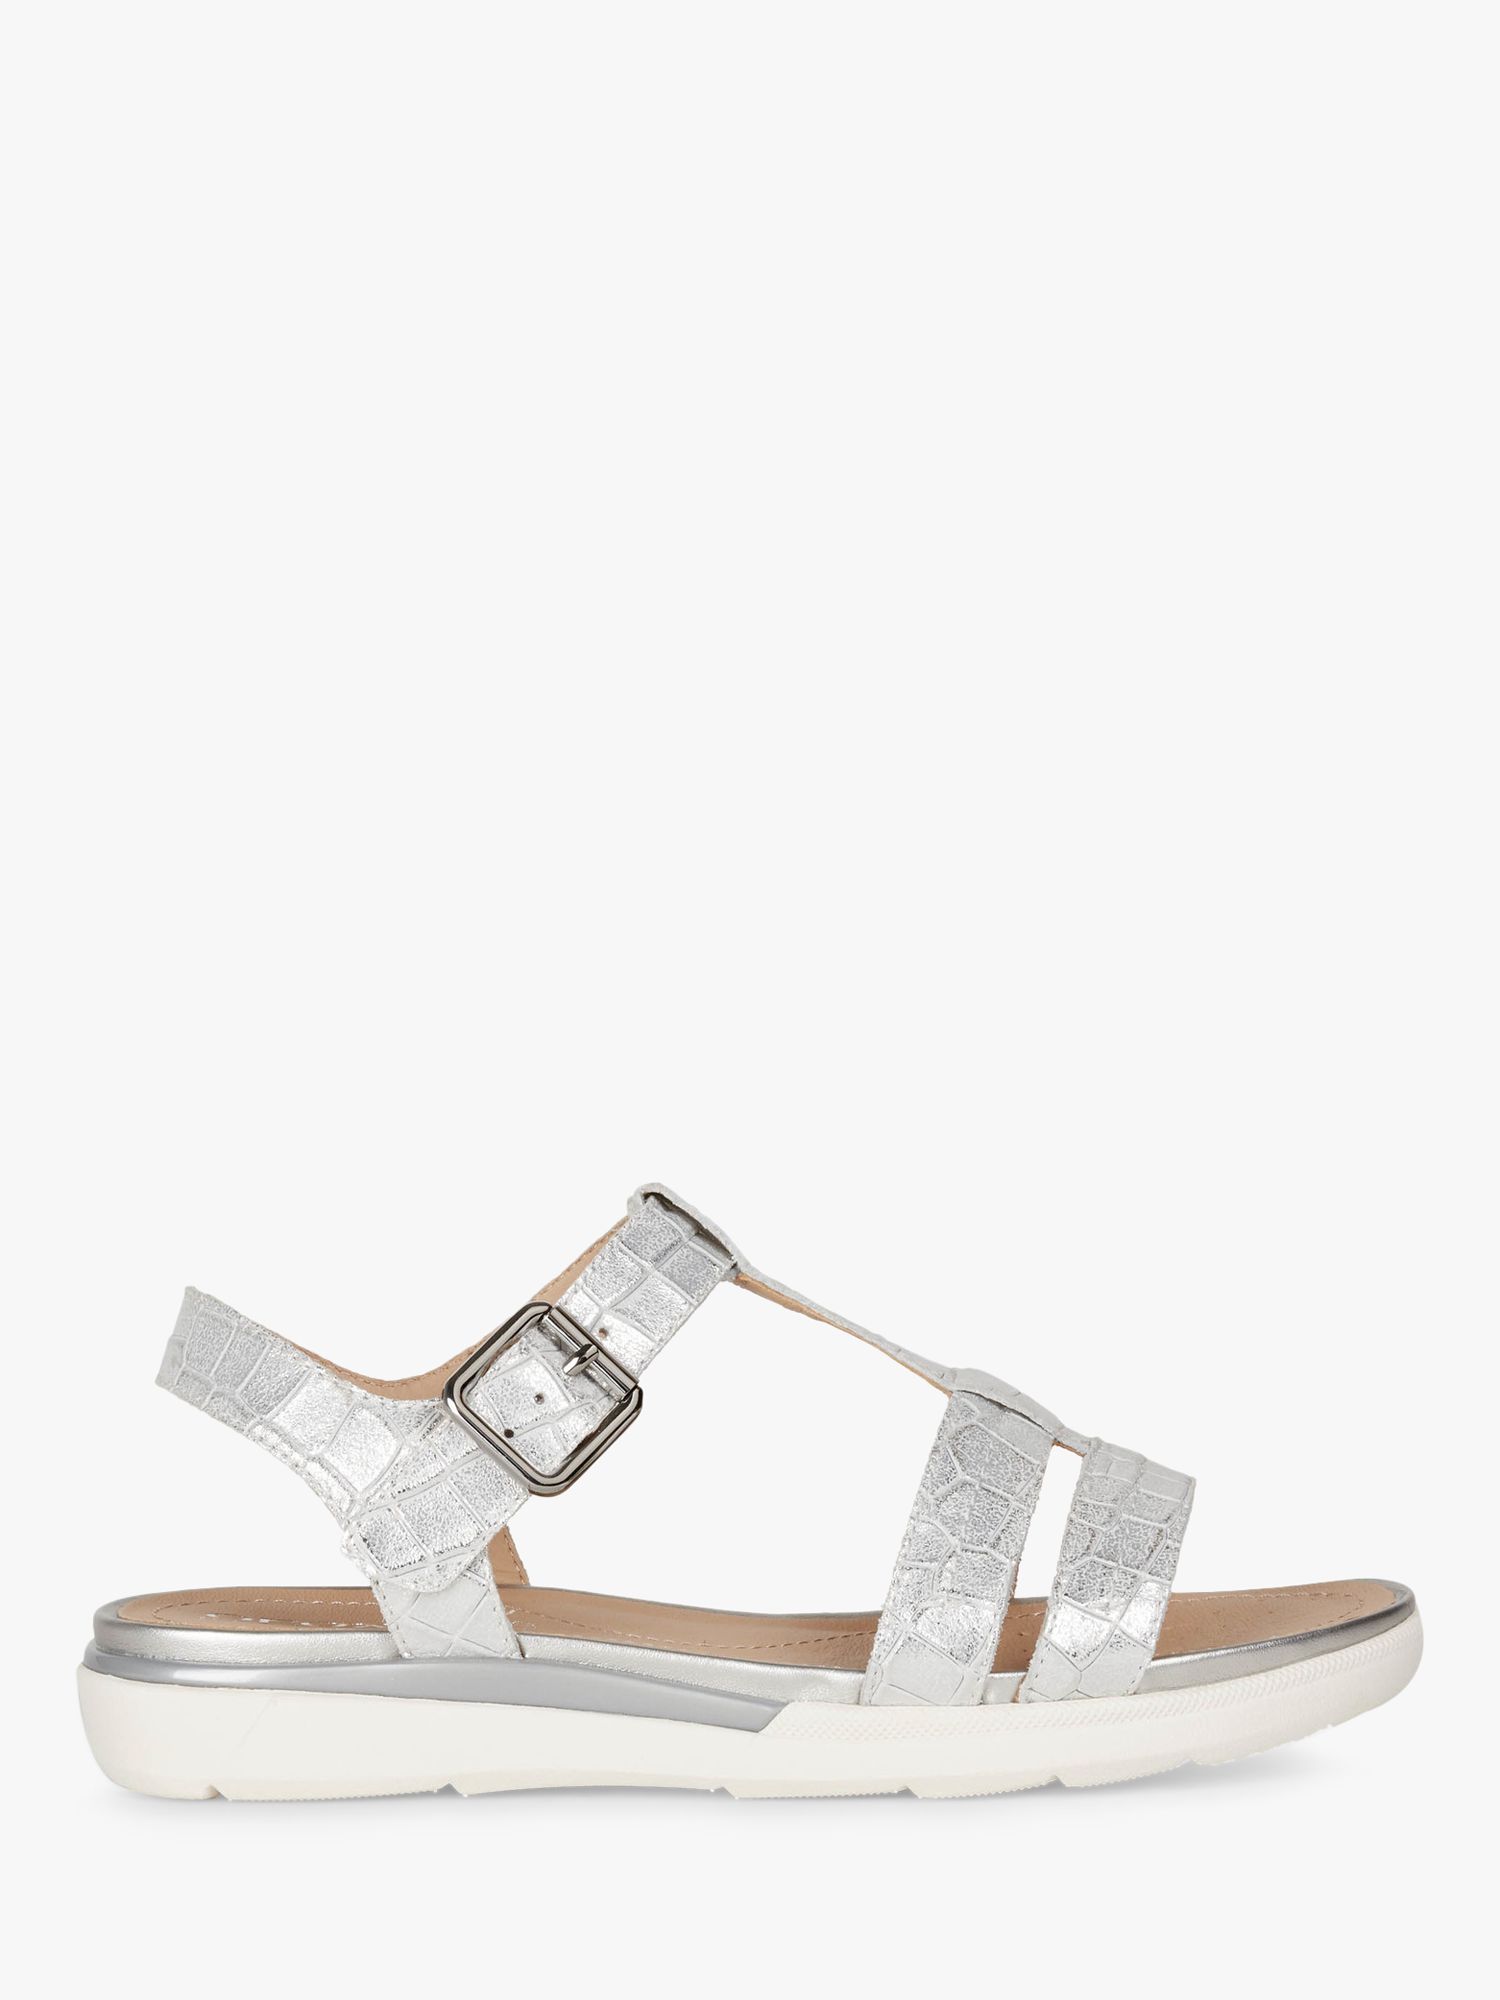 Geox Women's Hiver Leather Flat Sandals, Silver at John Lewis & Partners